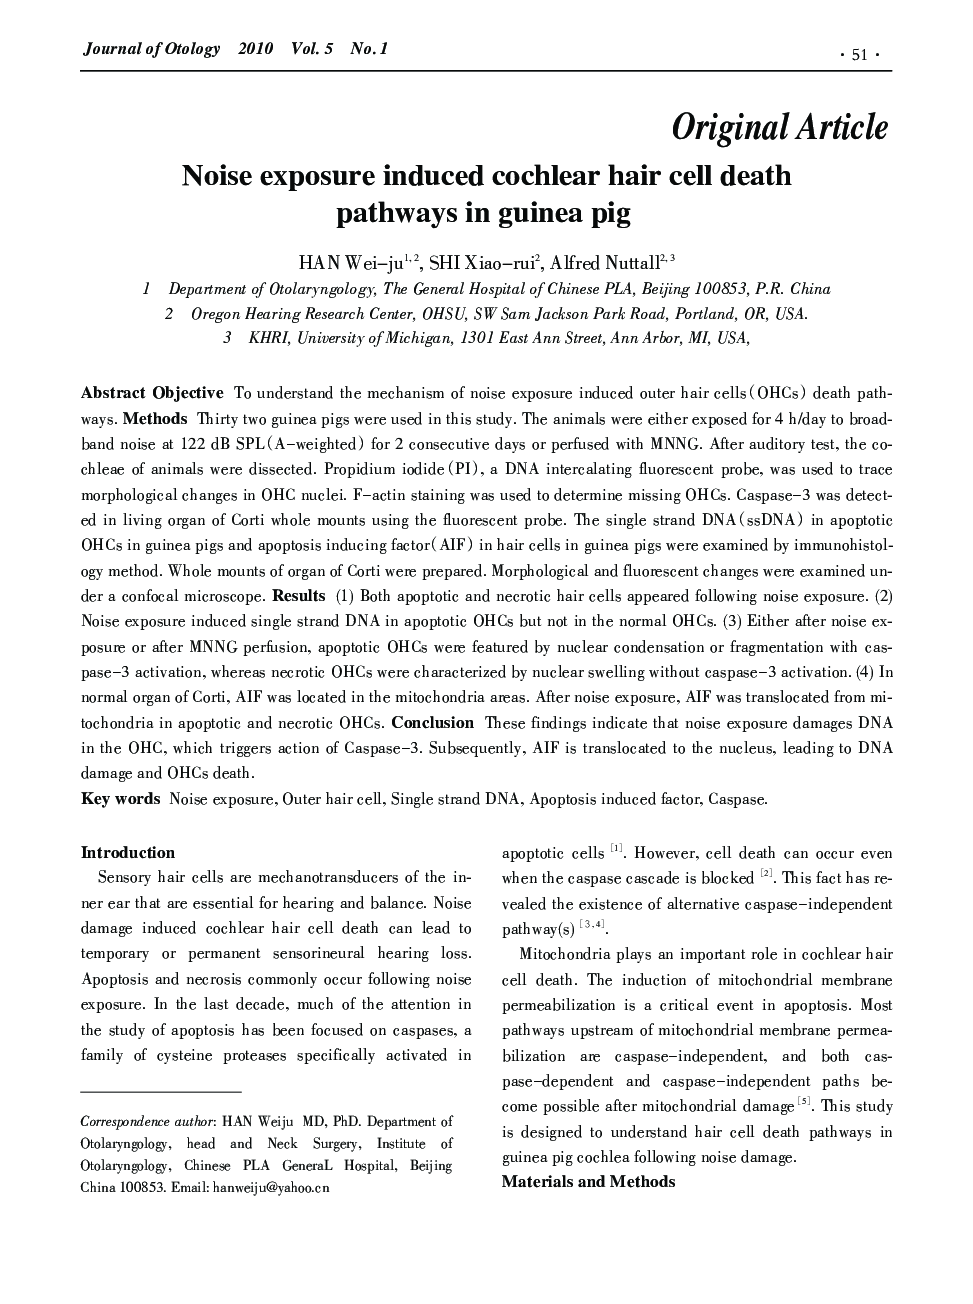 Noise exposure induced cochlear hair cell death pathways in guinea pig